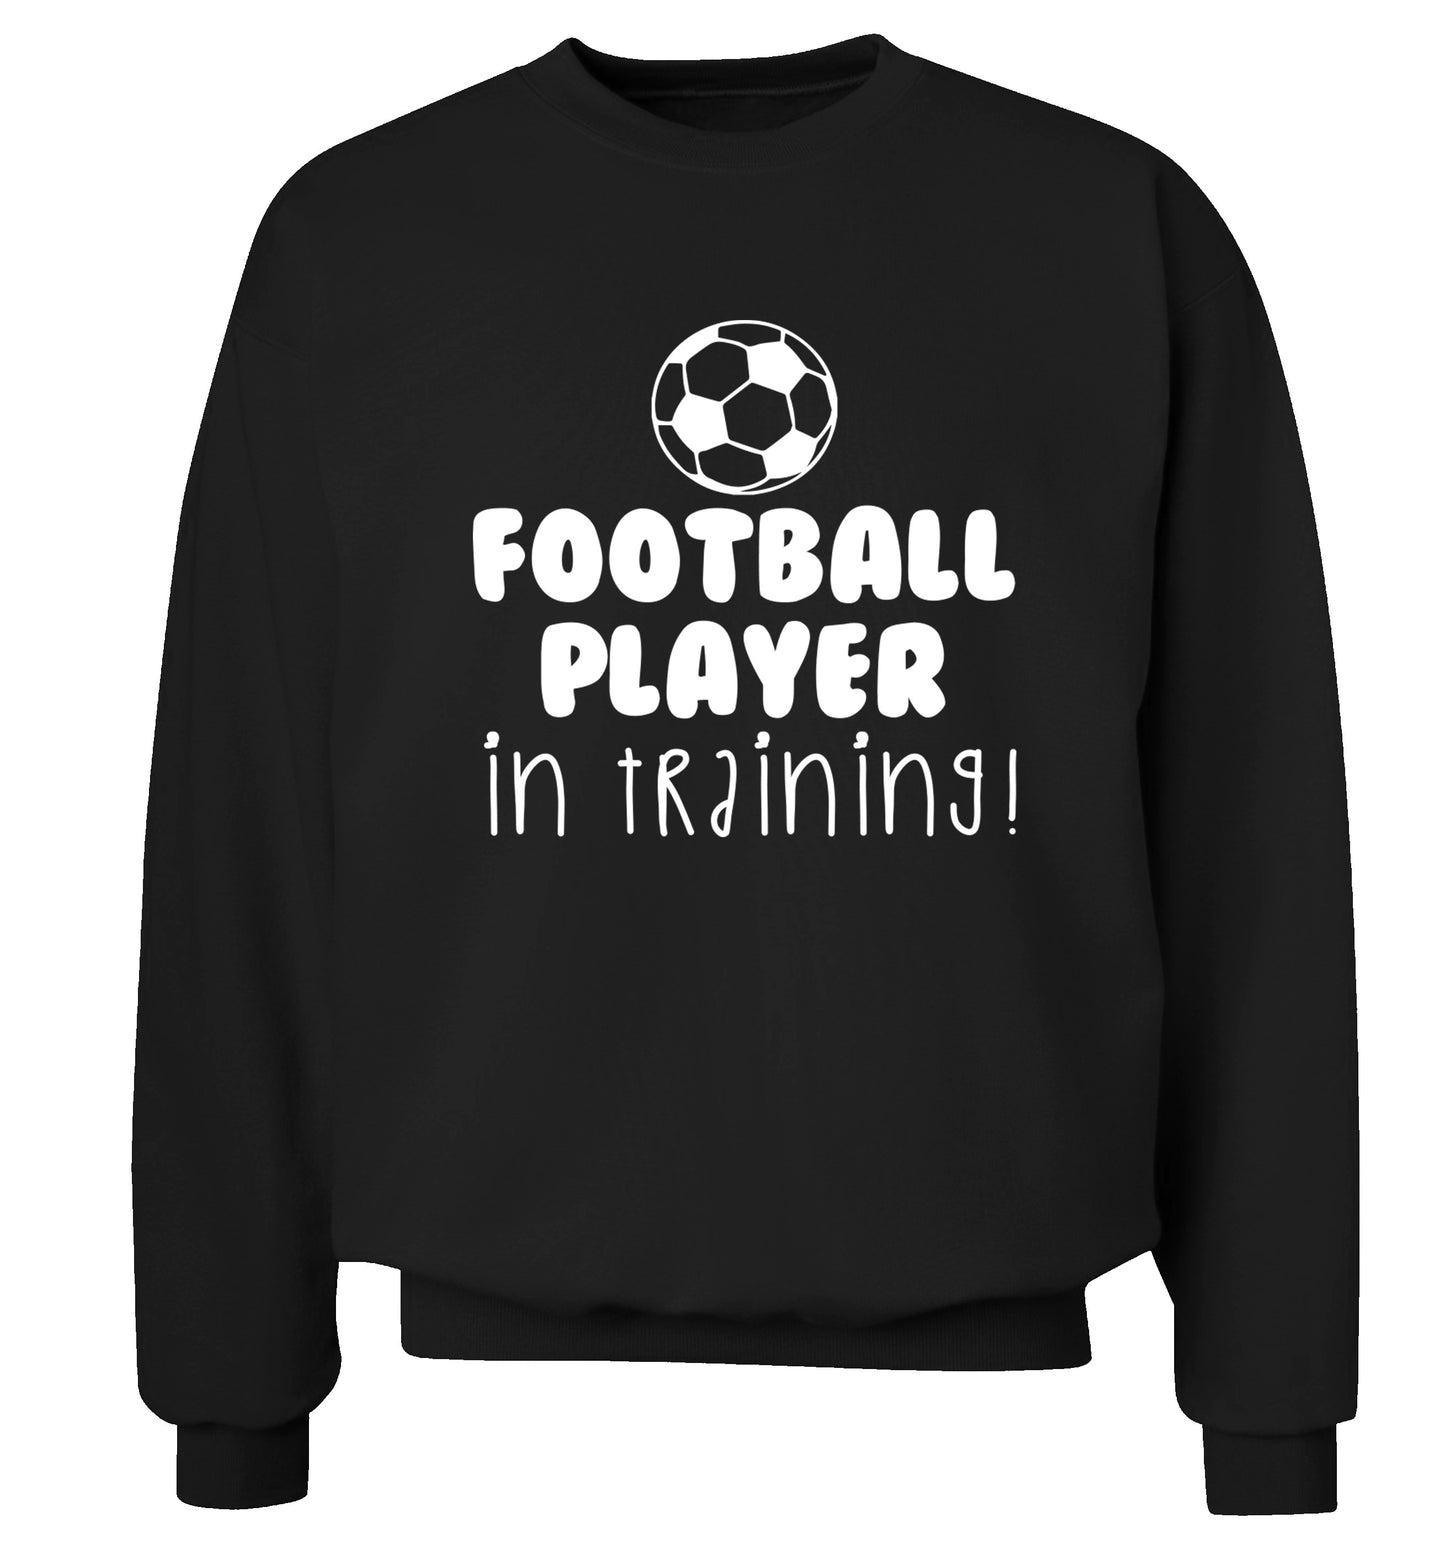 Football player in training Adult's unisex black Sweater 2XL